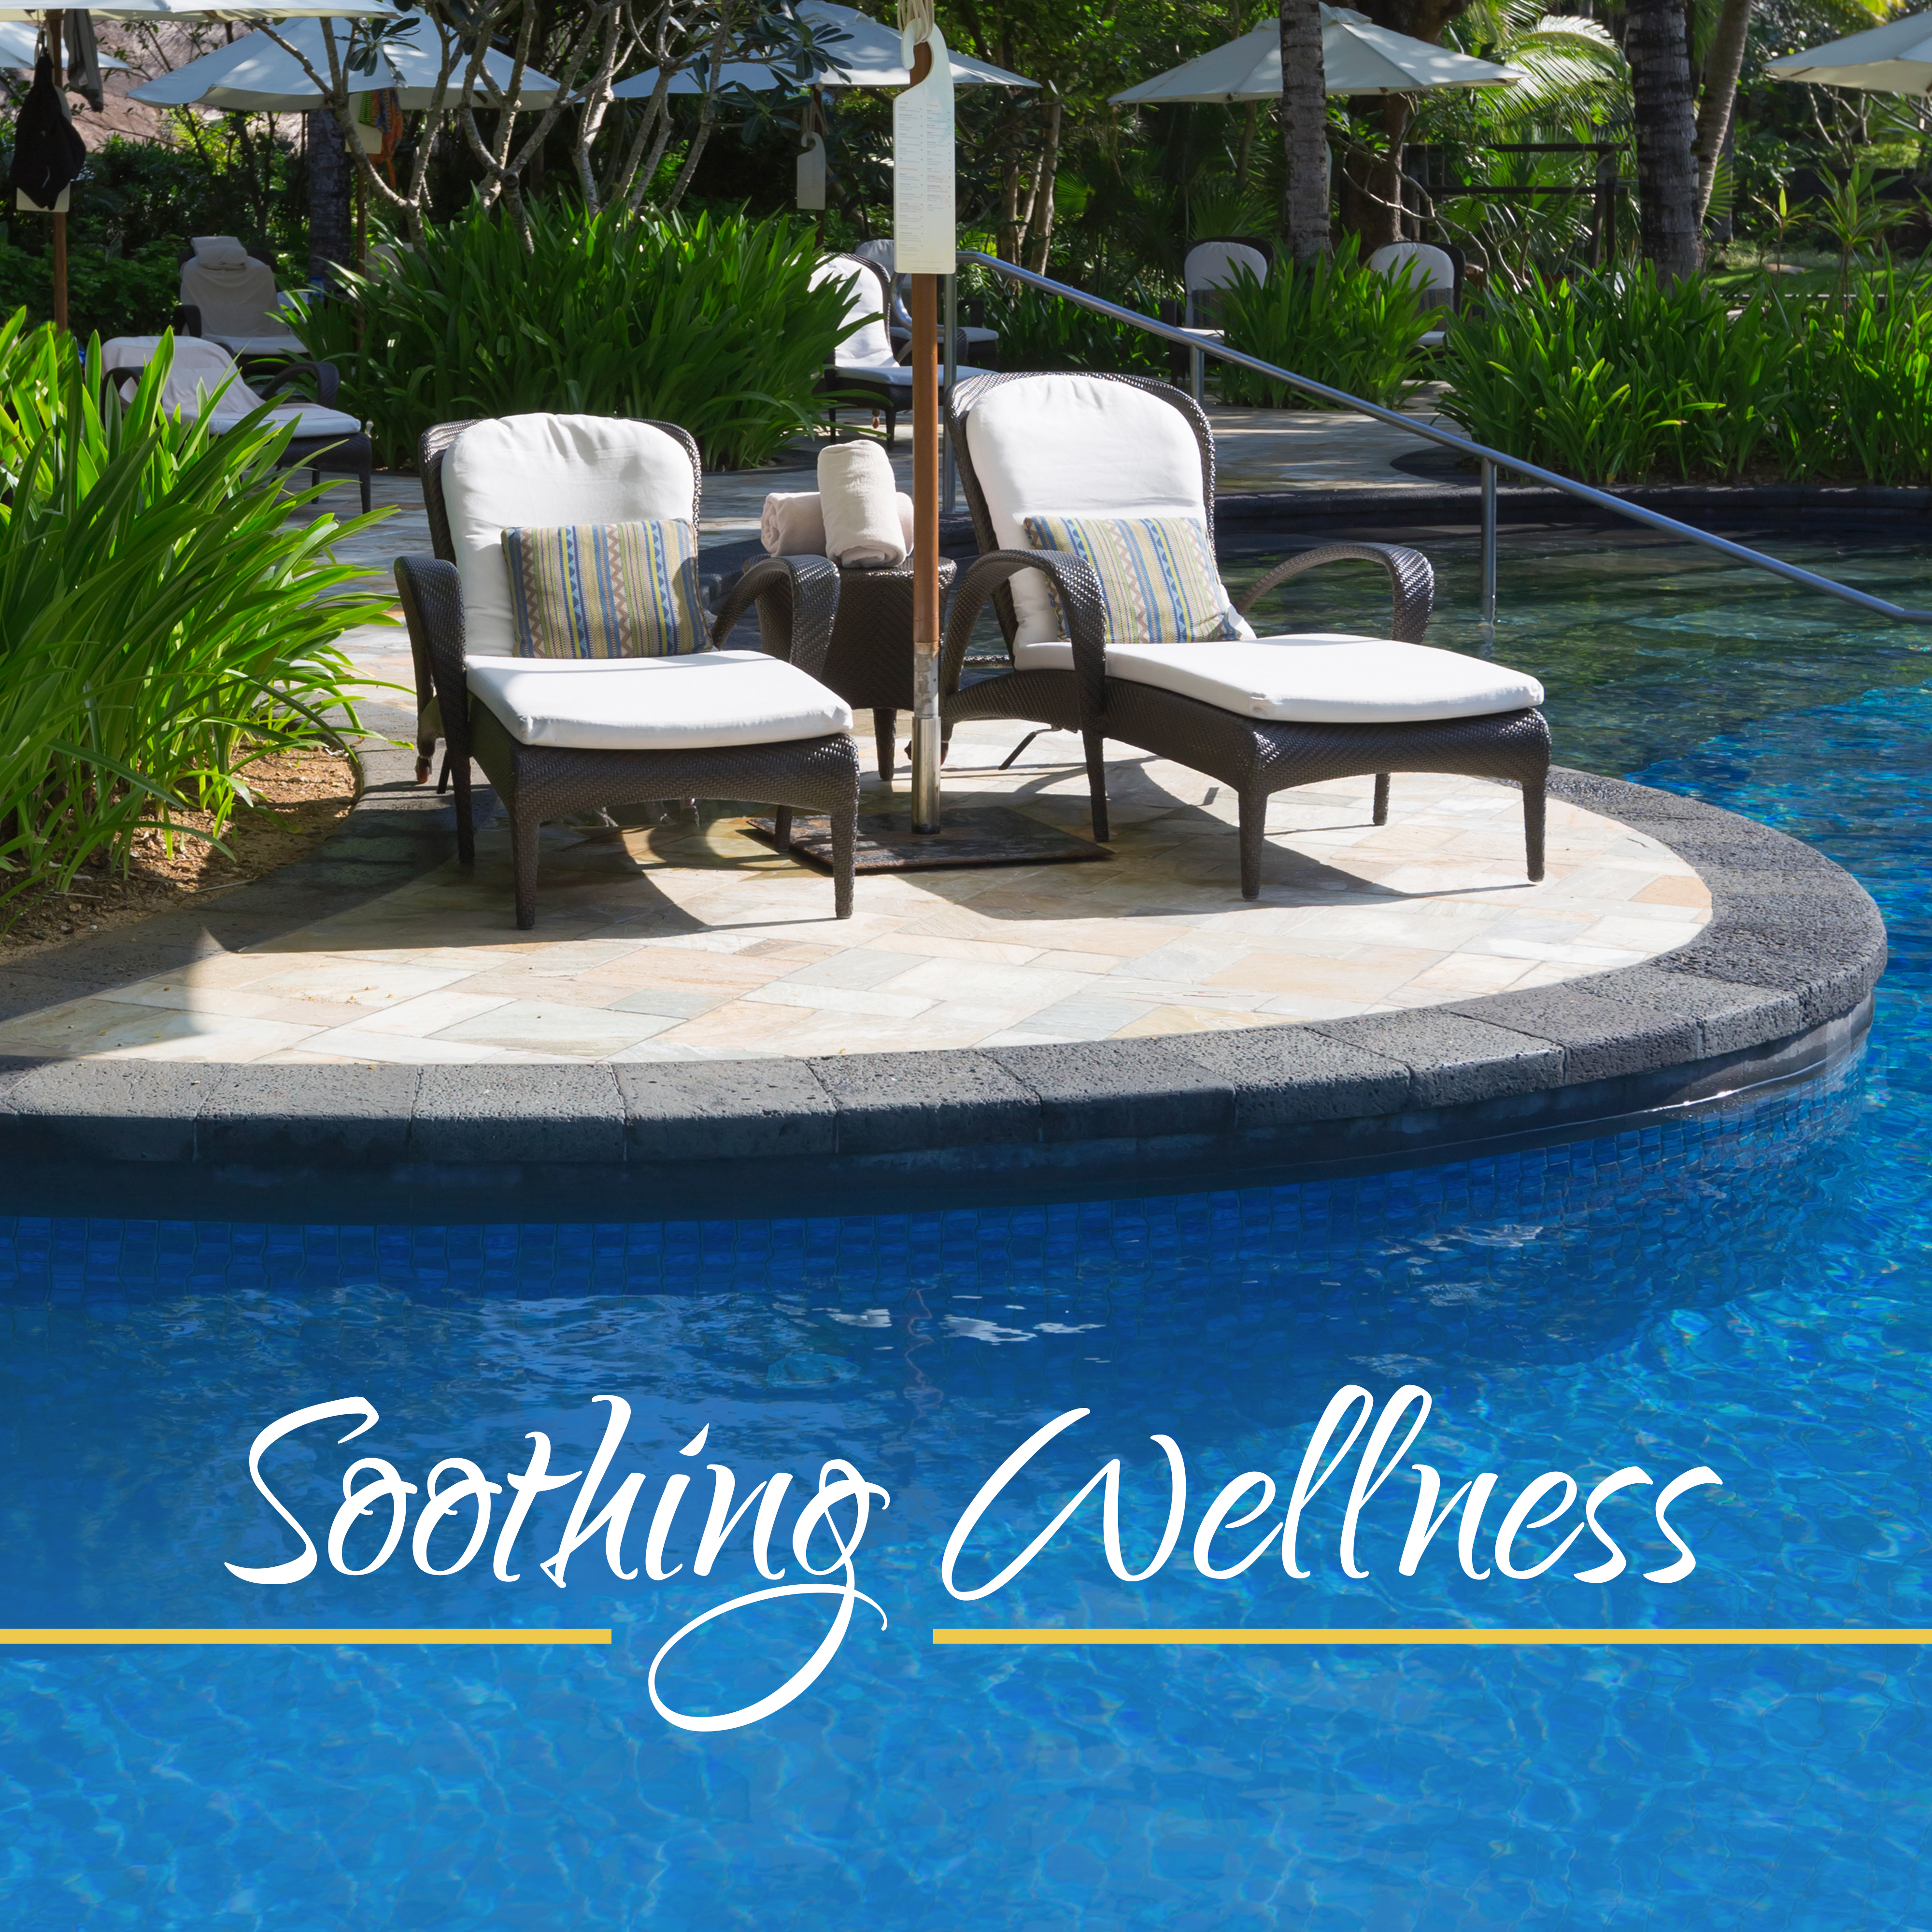 Soothing Wellness – Soft Spa Music, Stress Relief, Zen, Inner Healing, Pure Massage, Spa Dreams, Relax